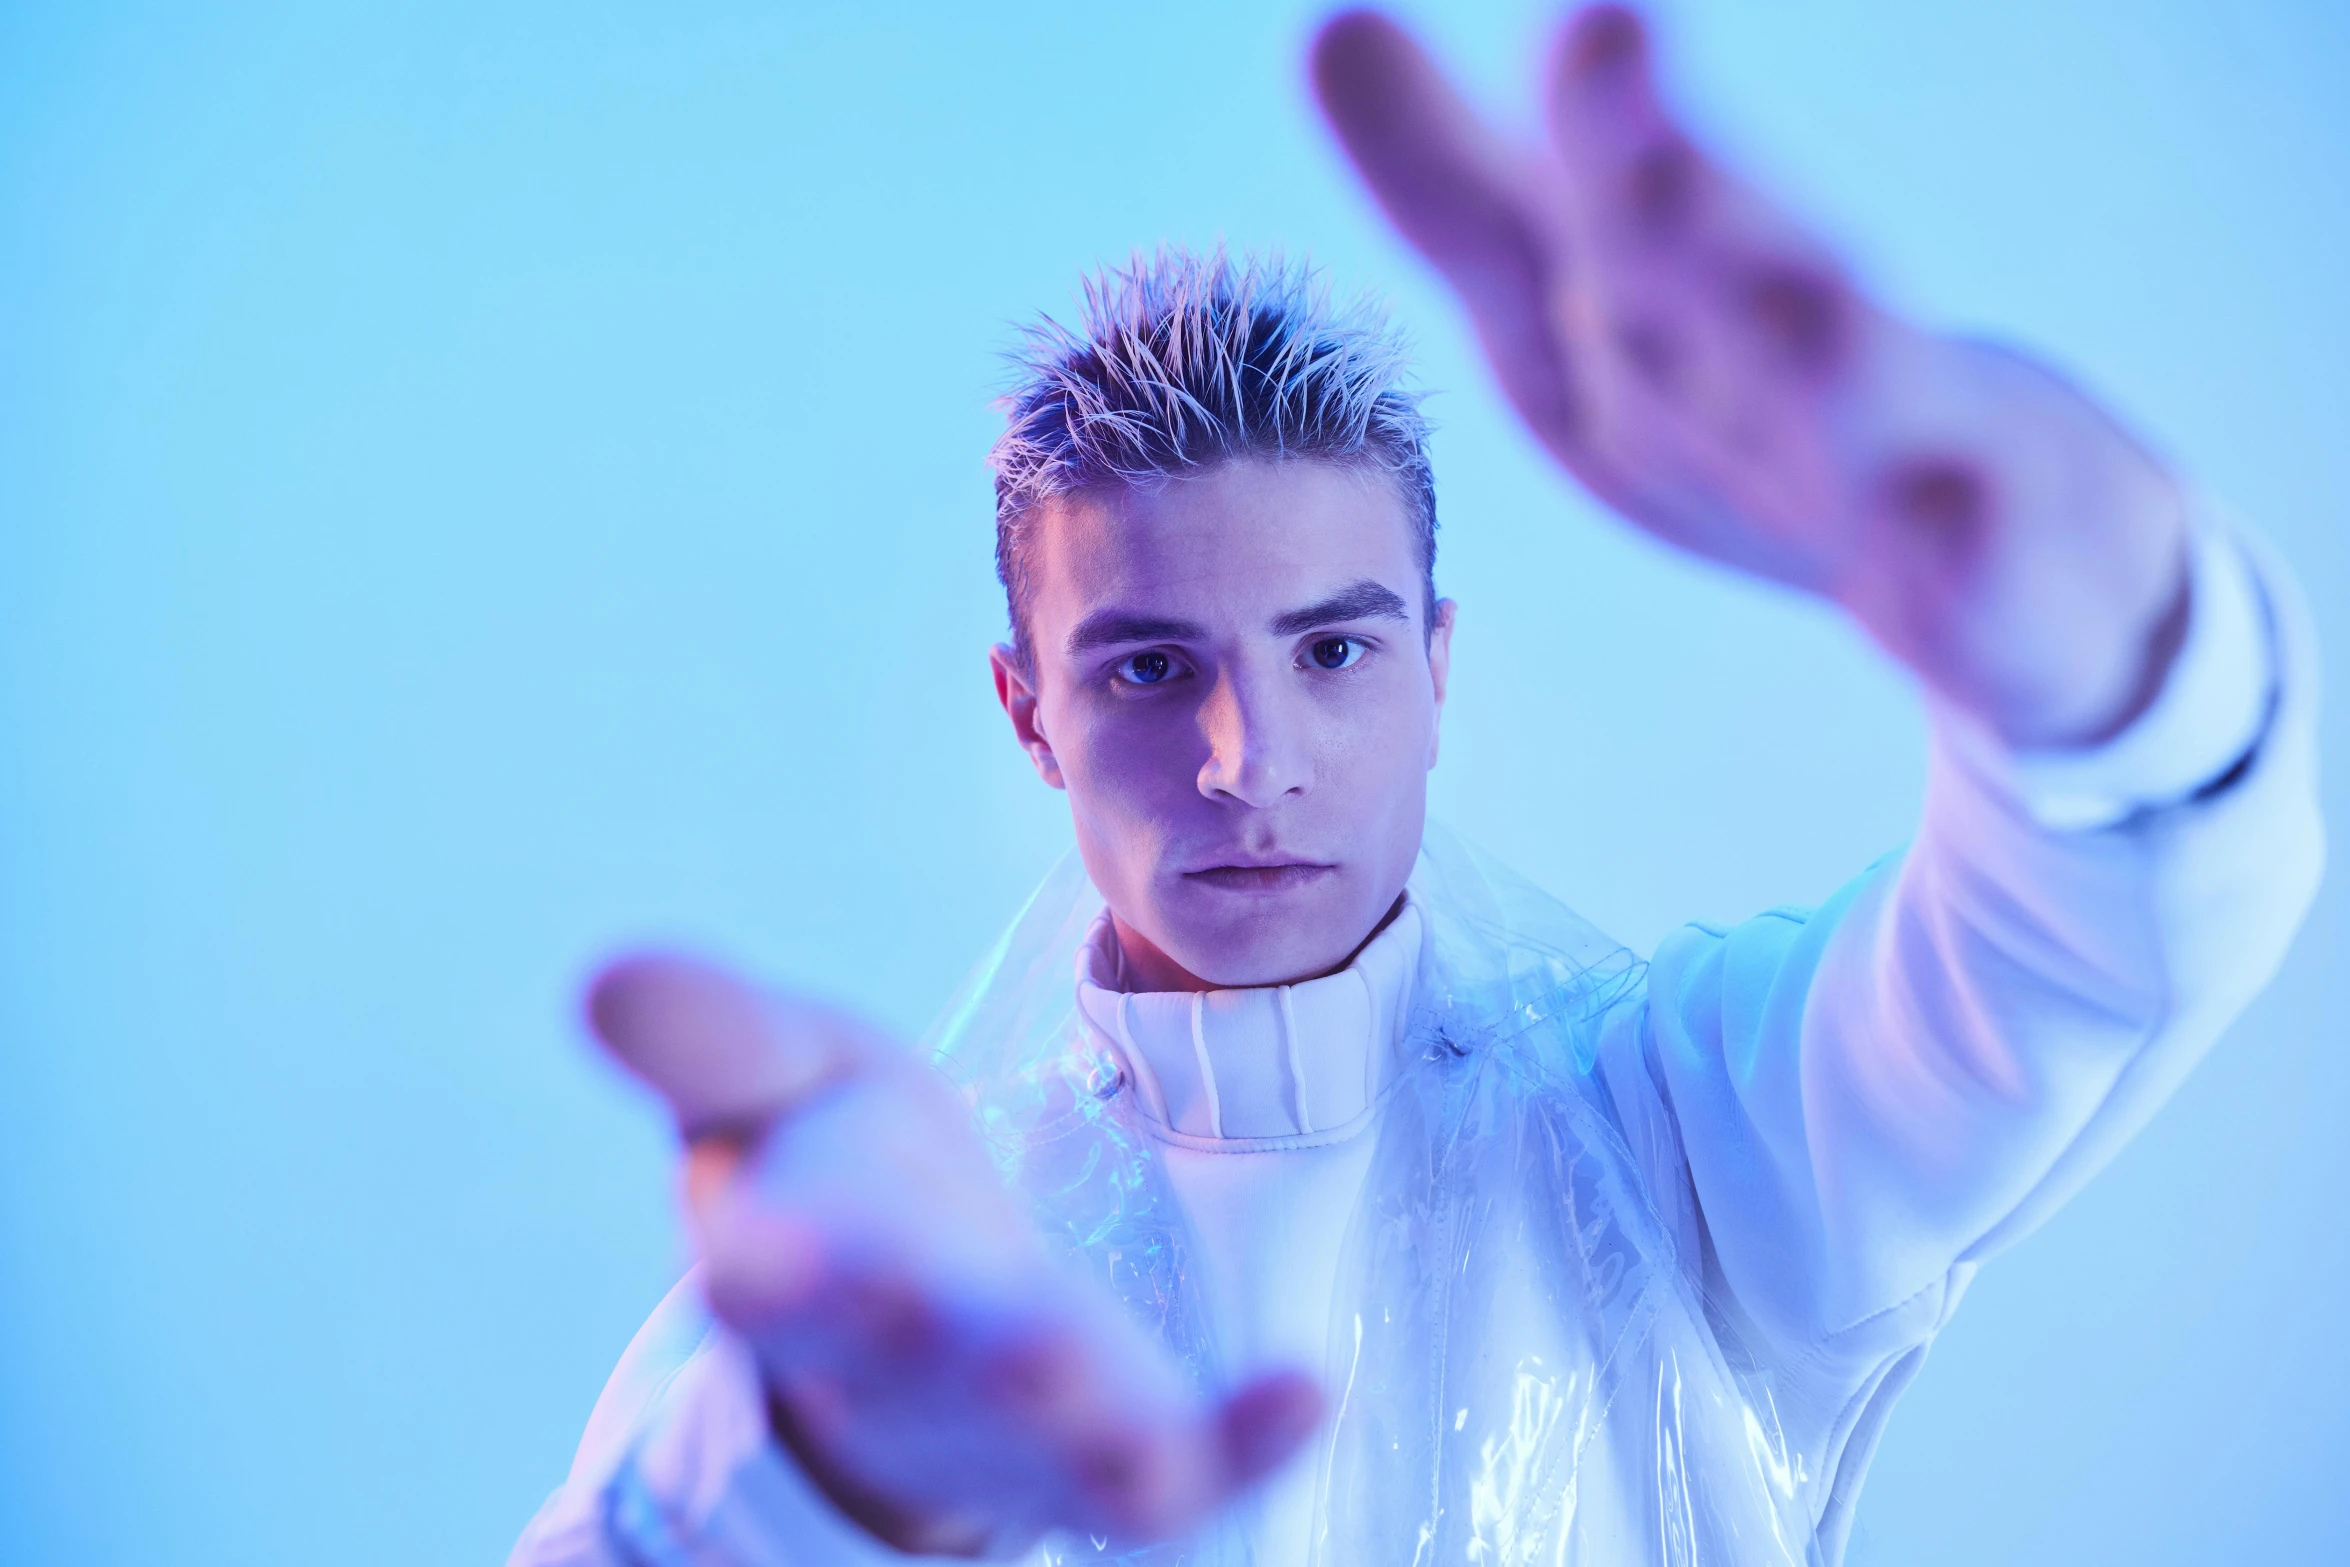 a man standing in front of a blue background, an album cover, inspired by Kristian Kreković, in white futuristic armor, behind the scenes photo, promo still, portrait image